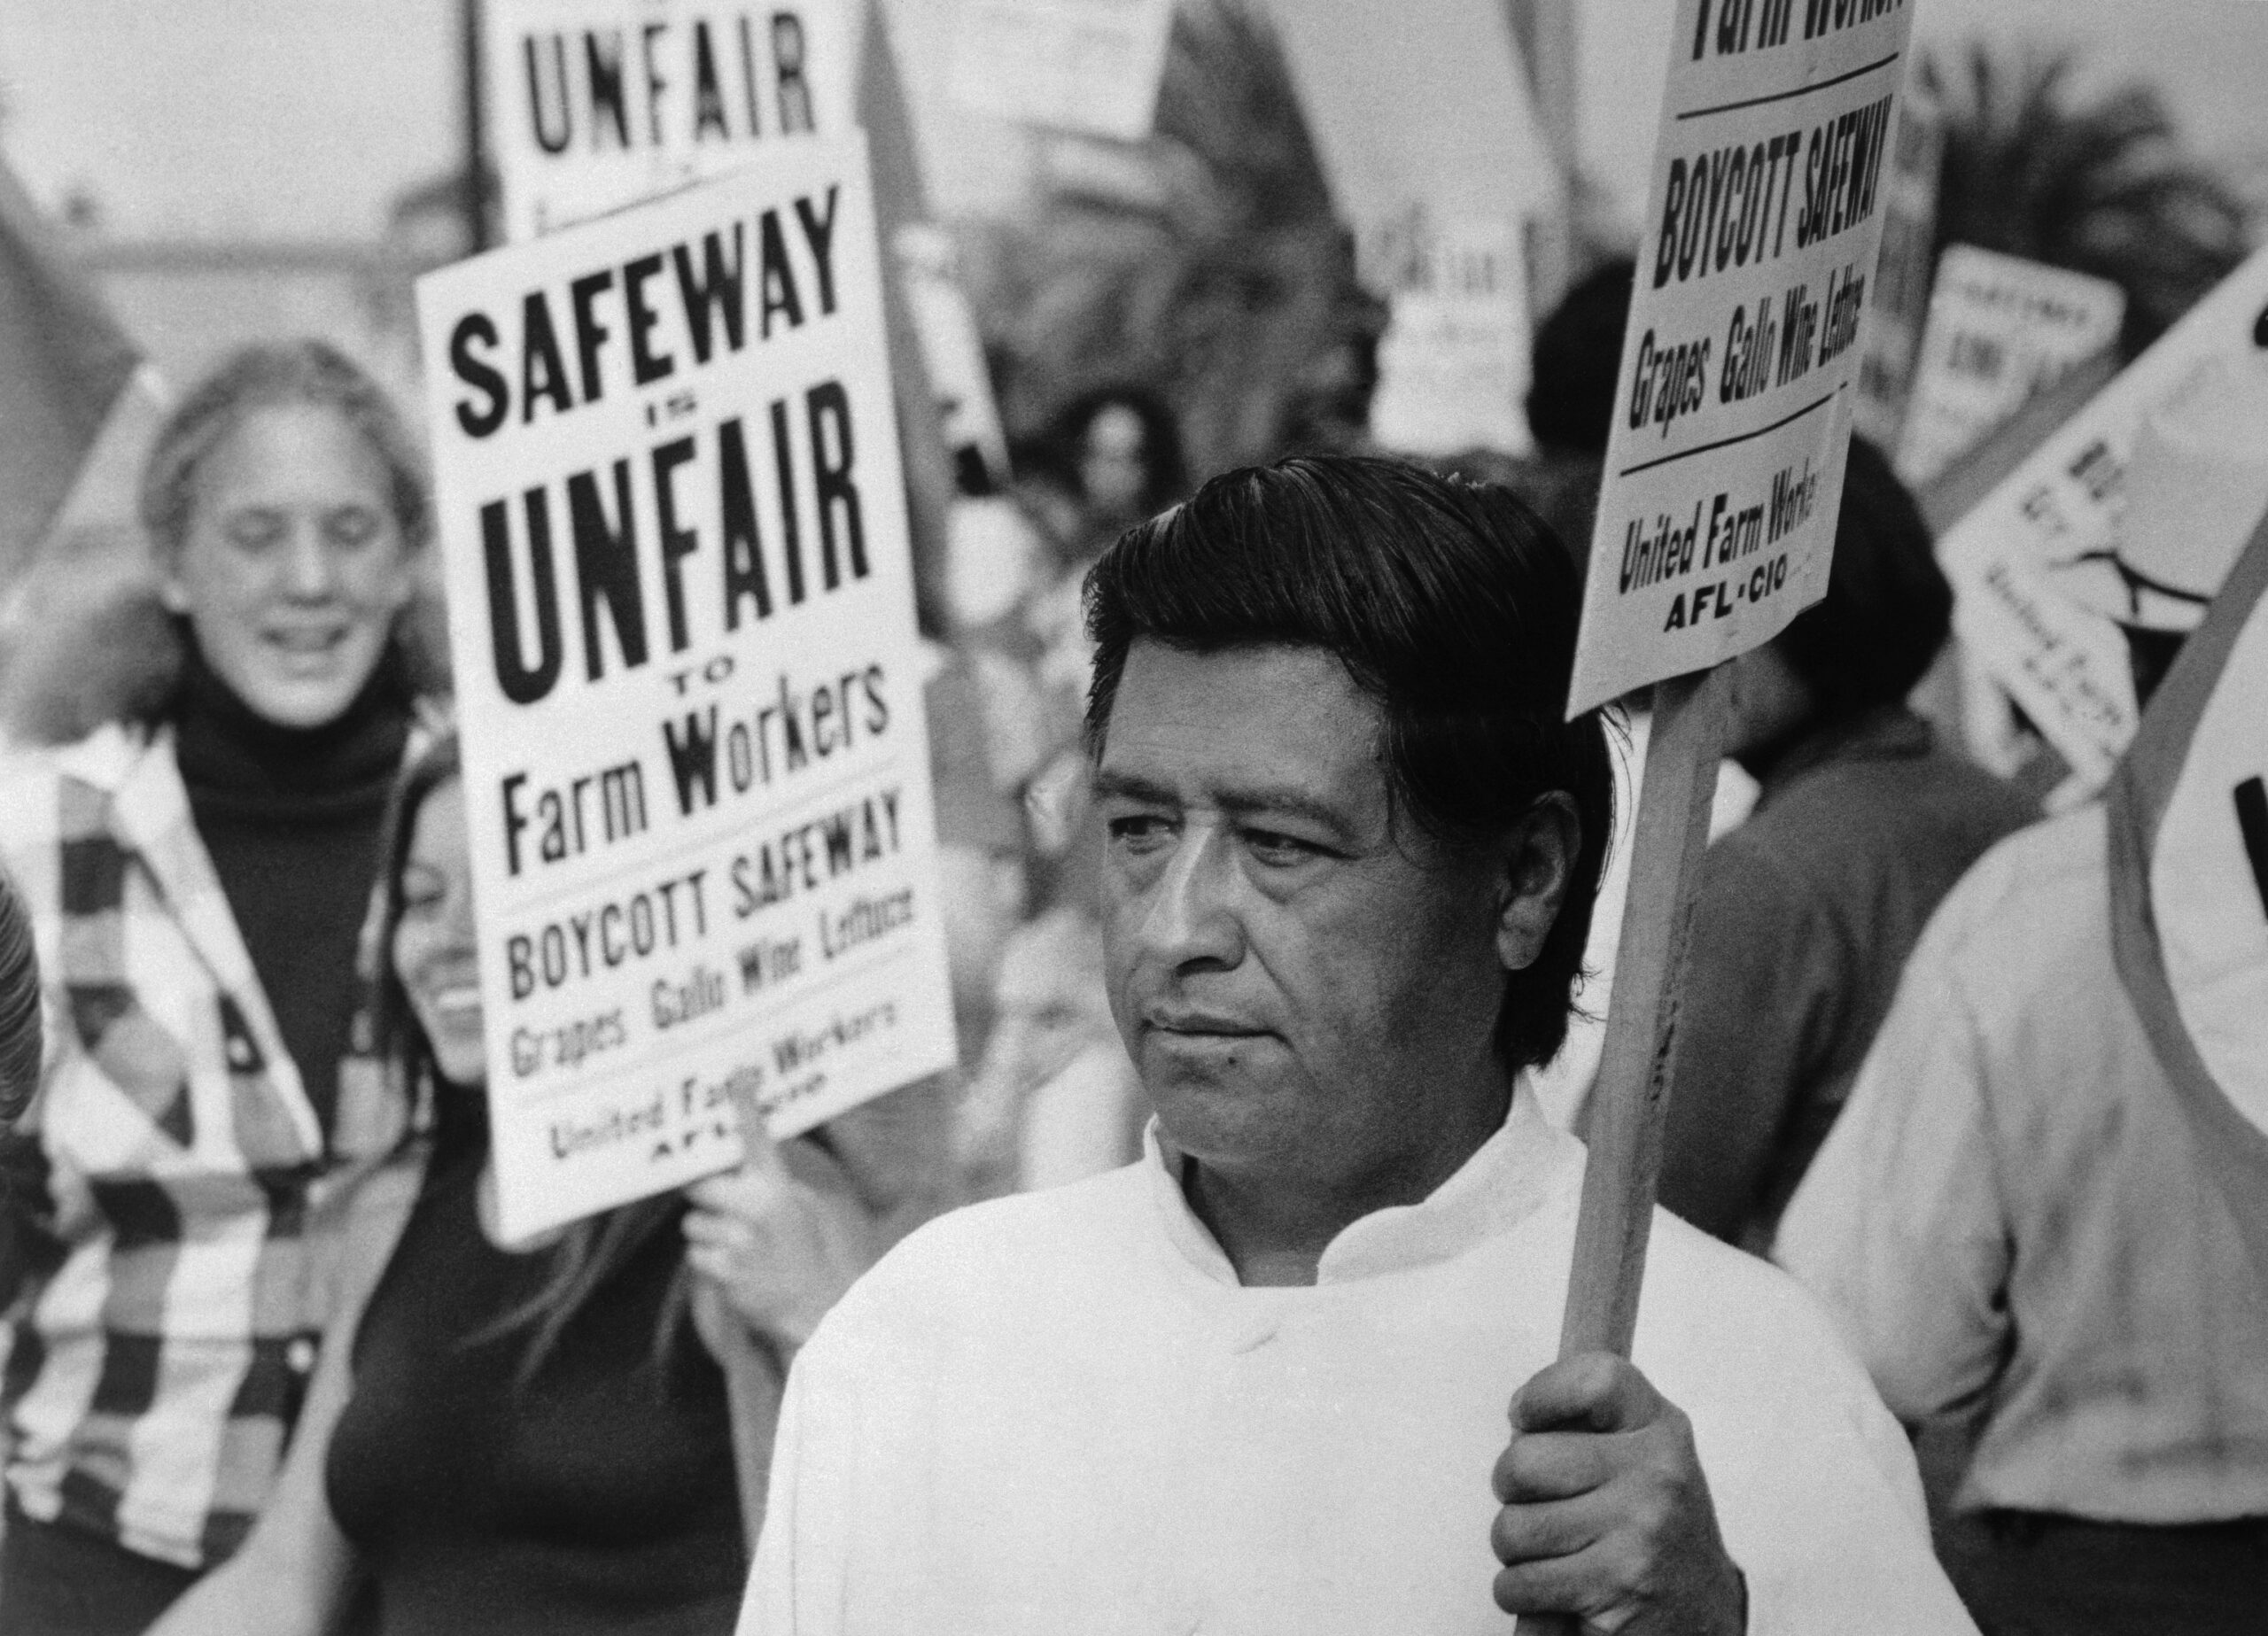 New Documentary Shows How Cesar Chavez Tapped into San Francisco Arts To Build Movement